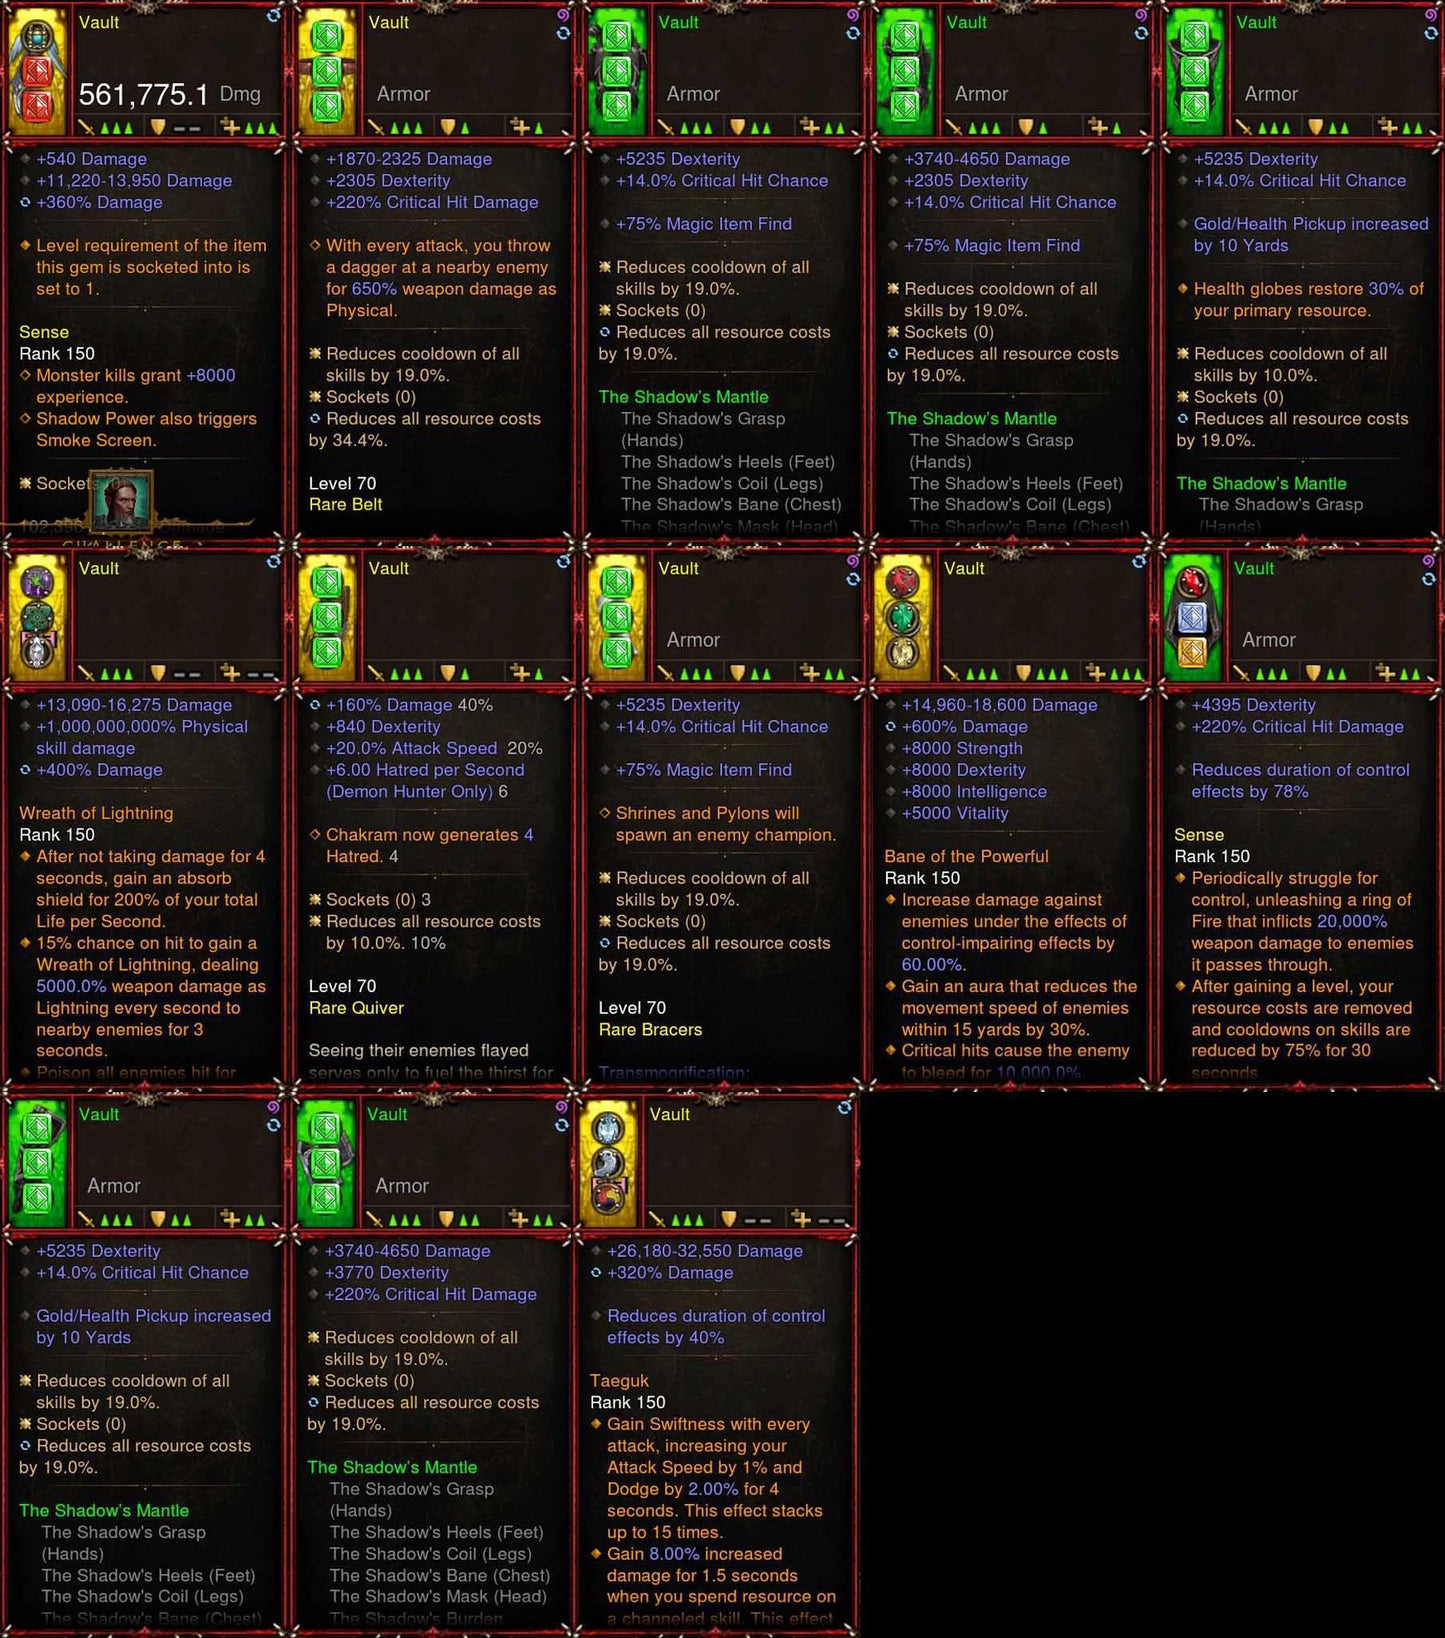 [Primal Ancient] [Quad DPS] Diablo 3 Immortal v5 Demon Hunter Shadow Mantle gRift 150 (Magic Find, High CDR, RR) Vault Diablo 3 Mods ROS Seasonal and Non Seasonal Save Mod - Modded Items and Gear - Hacks - Cheats - Trainers for Playstation 4 - Playstation 5 - Nintendo Switch - Xbox One